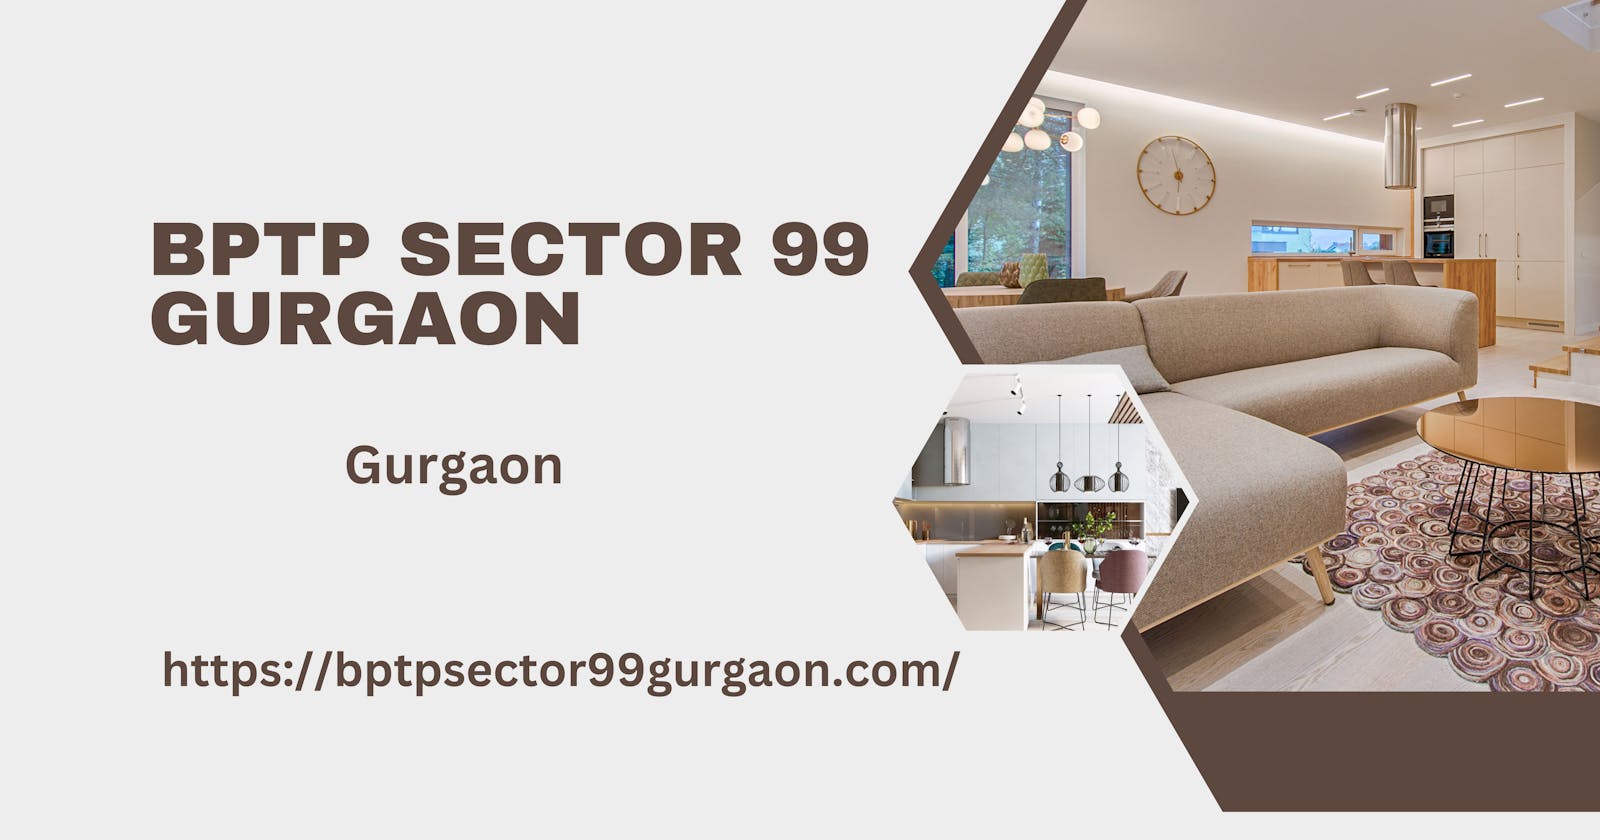 BPTP Sector 99 Gurgaon: Your Gateway to Luxury Living